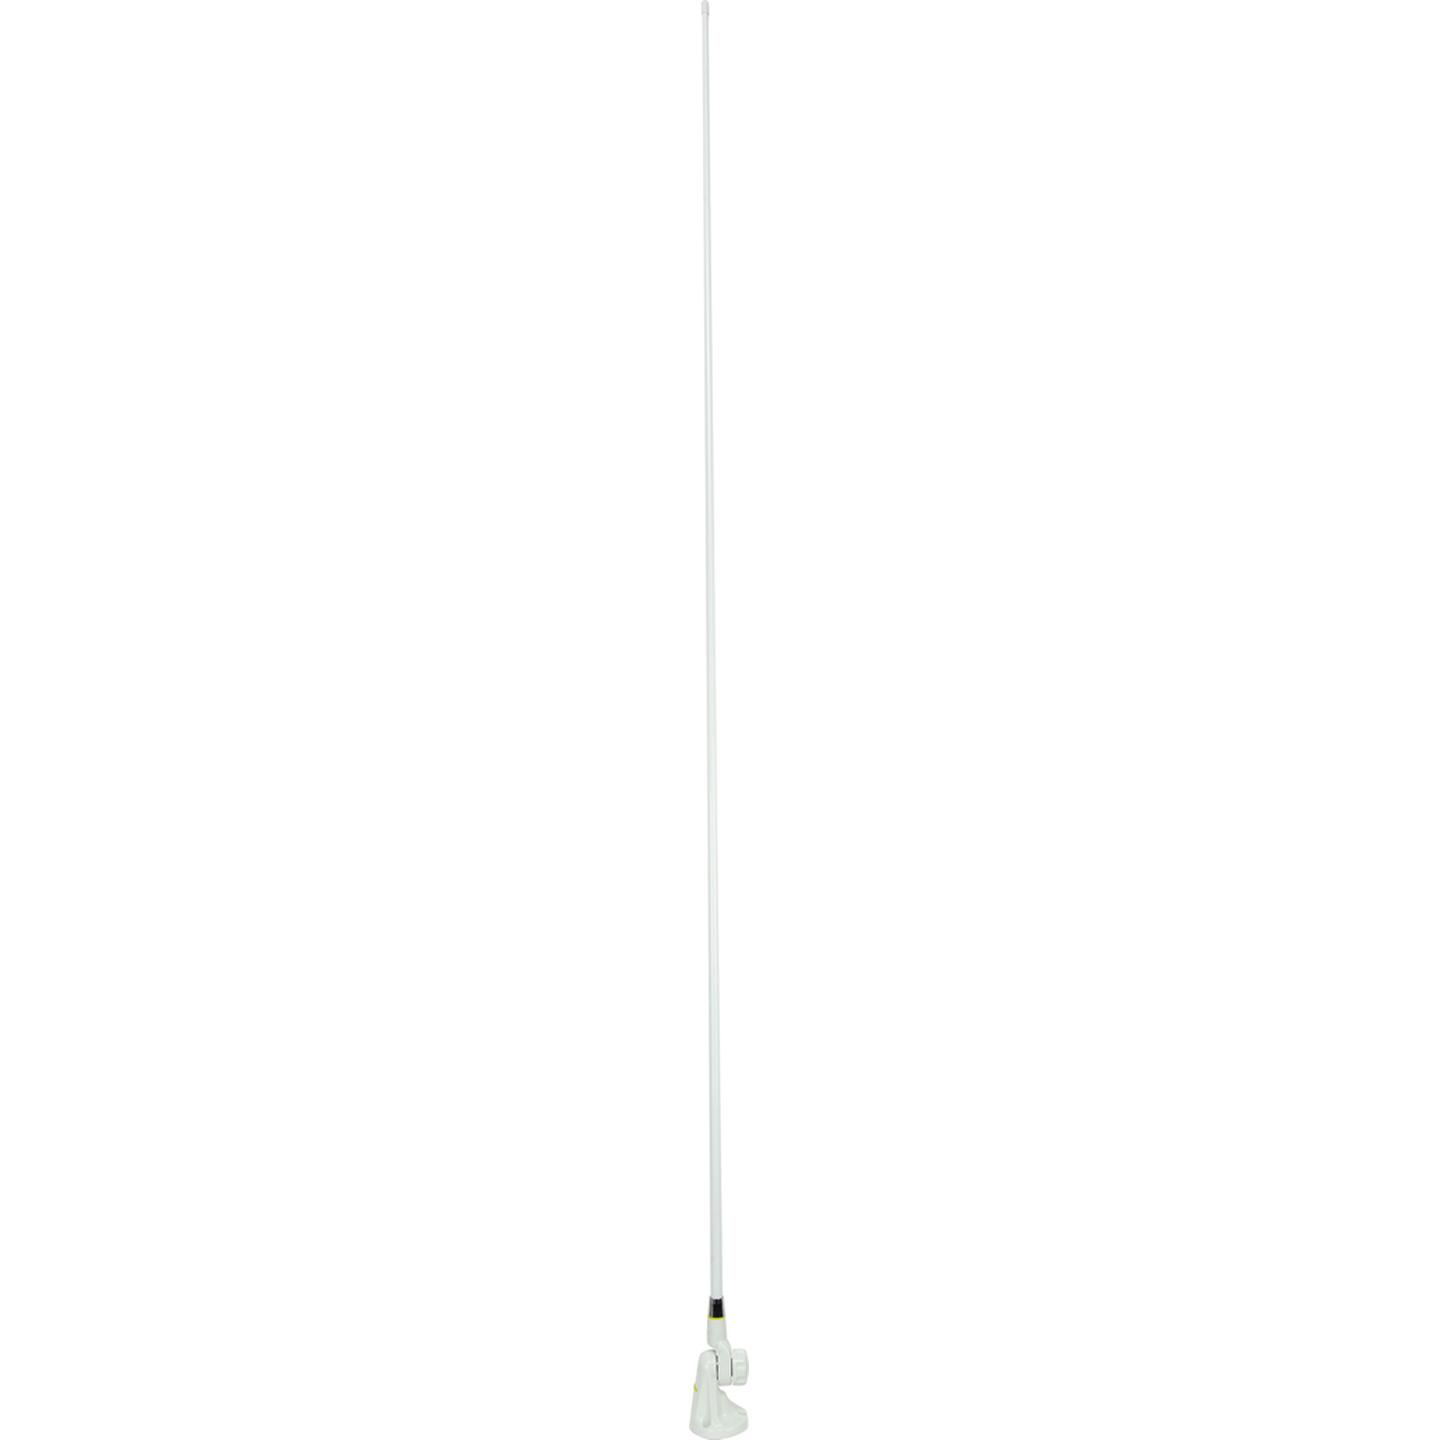 1800mm AM/FM Antenna Base Cable and Plug - White